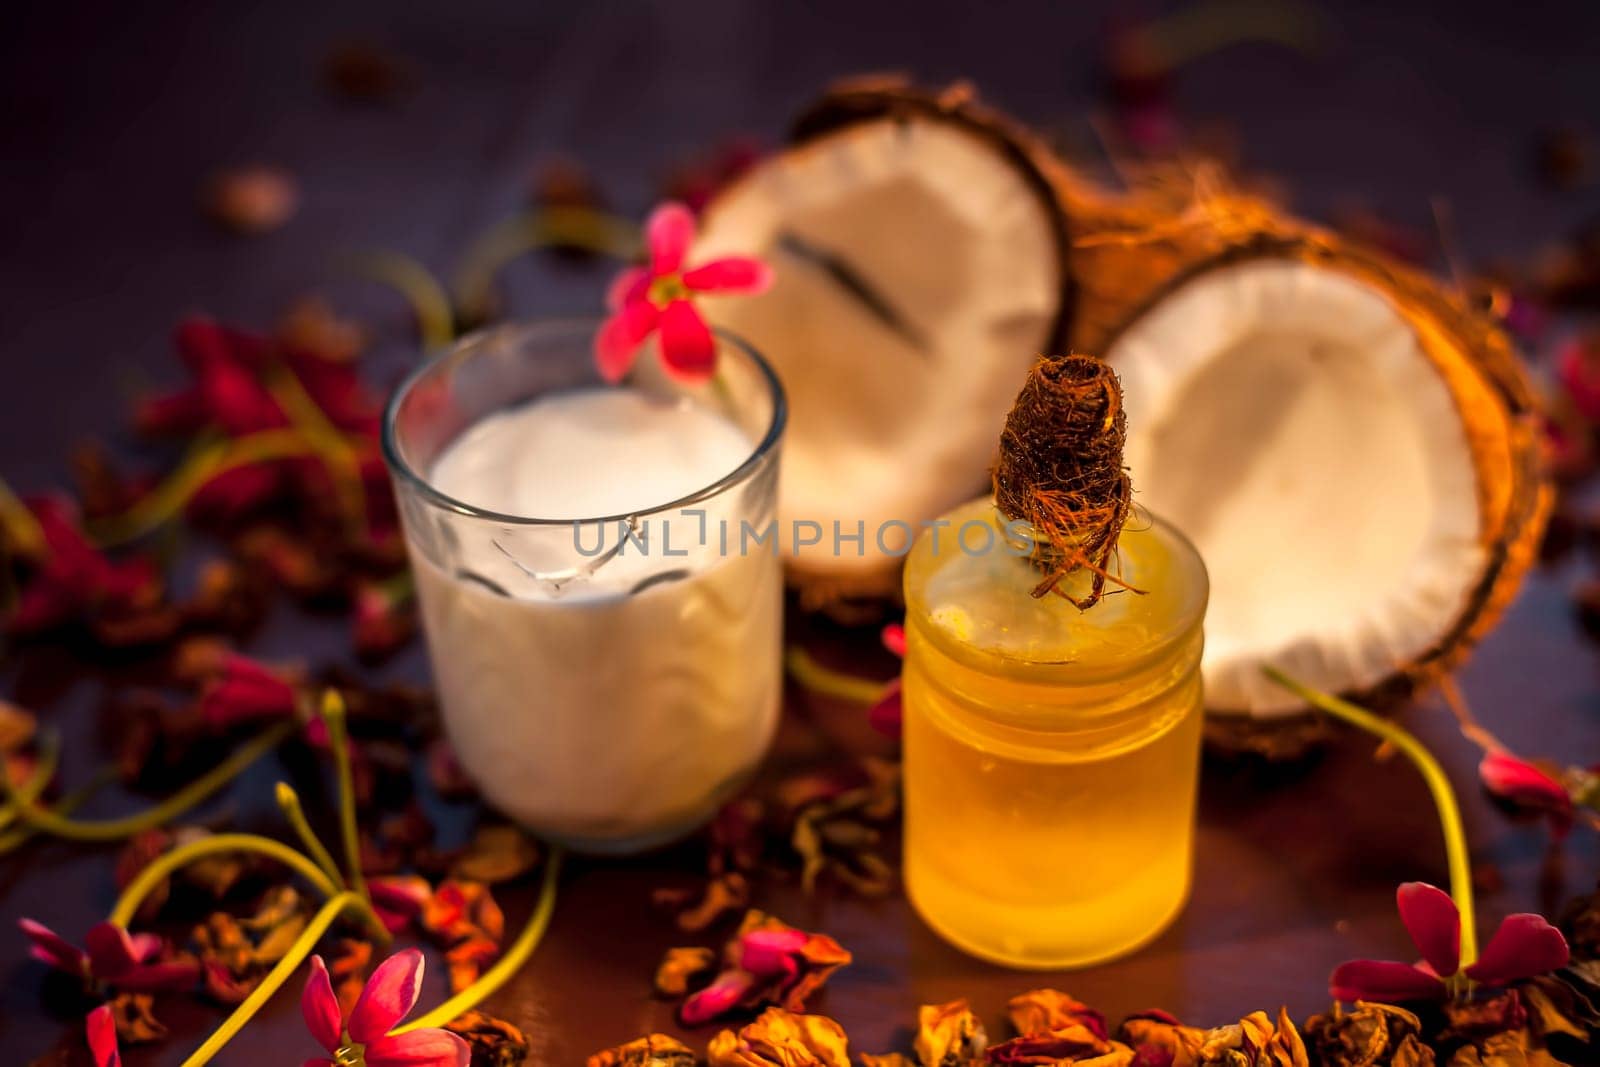 Coconut face mask on the brown colored surface consisting of some coconut milk and olive oil when applied penetrates the skin and exfoliates deeply. Face mask for protection against skin damage. by mirzamlk